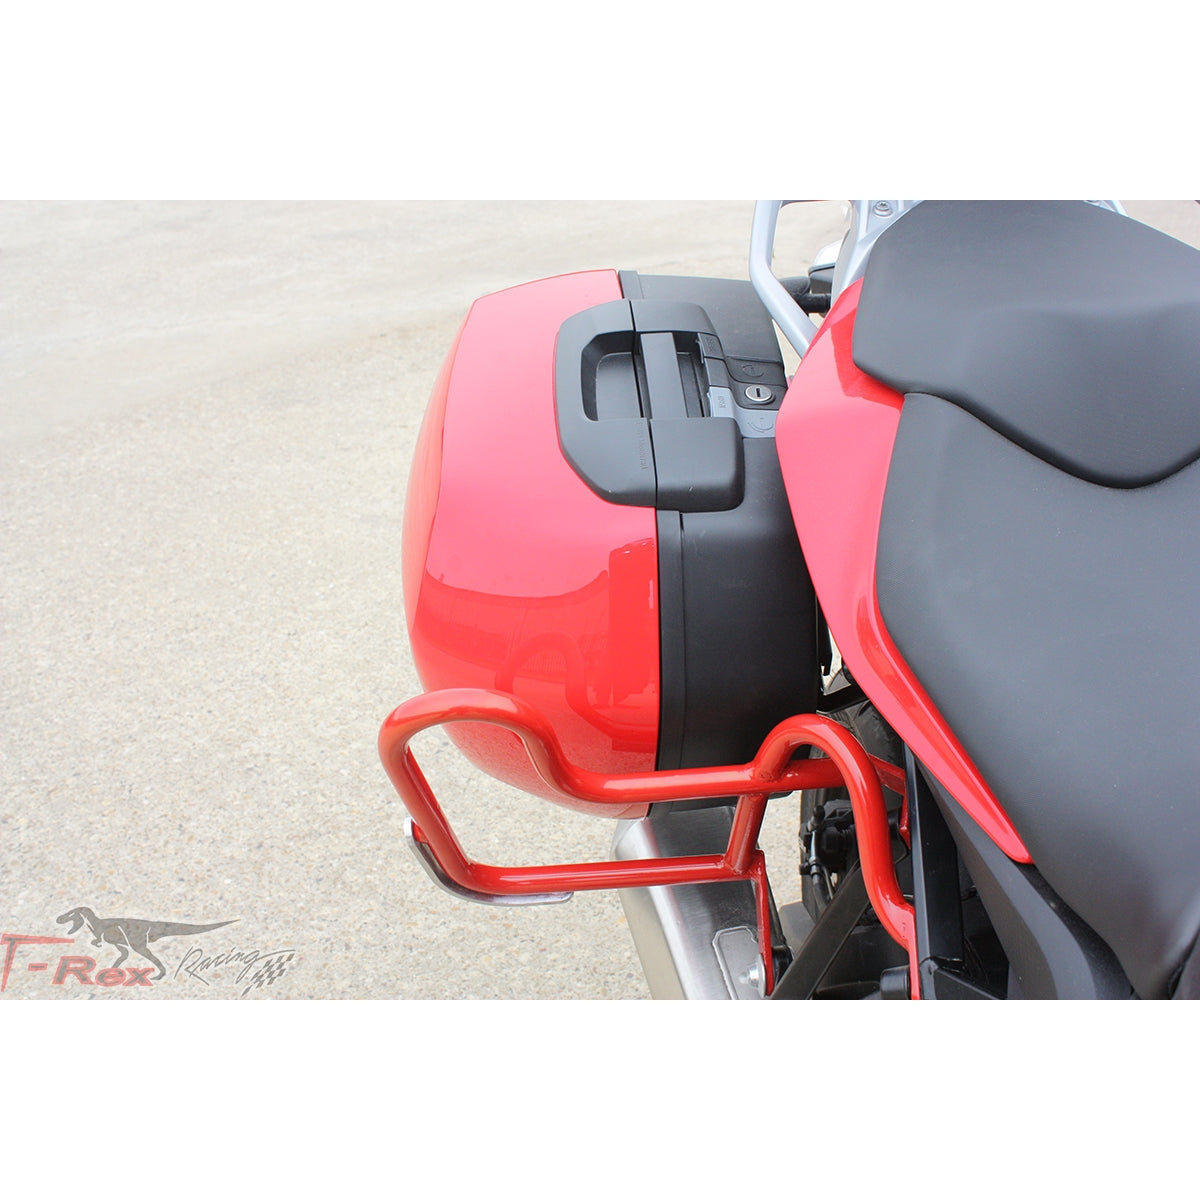 T-rex 116 - 2017 bmw s1000xr luggage guards